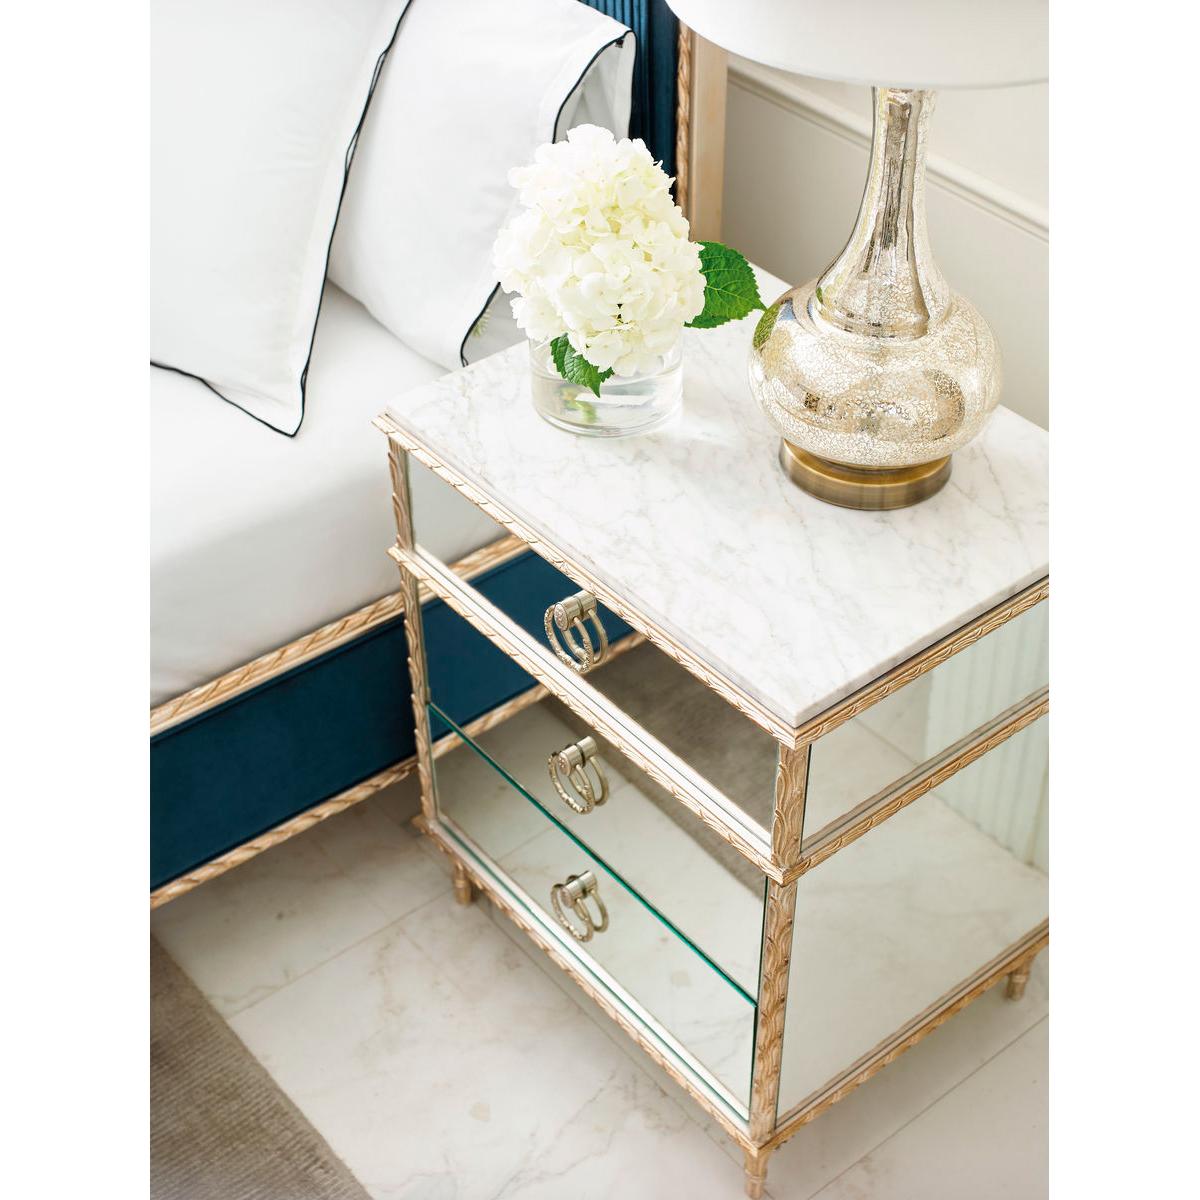 This exquisite nightstand features mirrored front and end panels that reflect light beautifully, adding a touch of glamour and spaciousness to any room.

Standing on cast aluminum legs with intricate cast moldings finished in a sophisticated gold